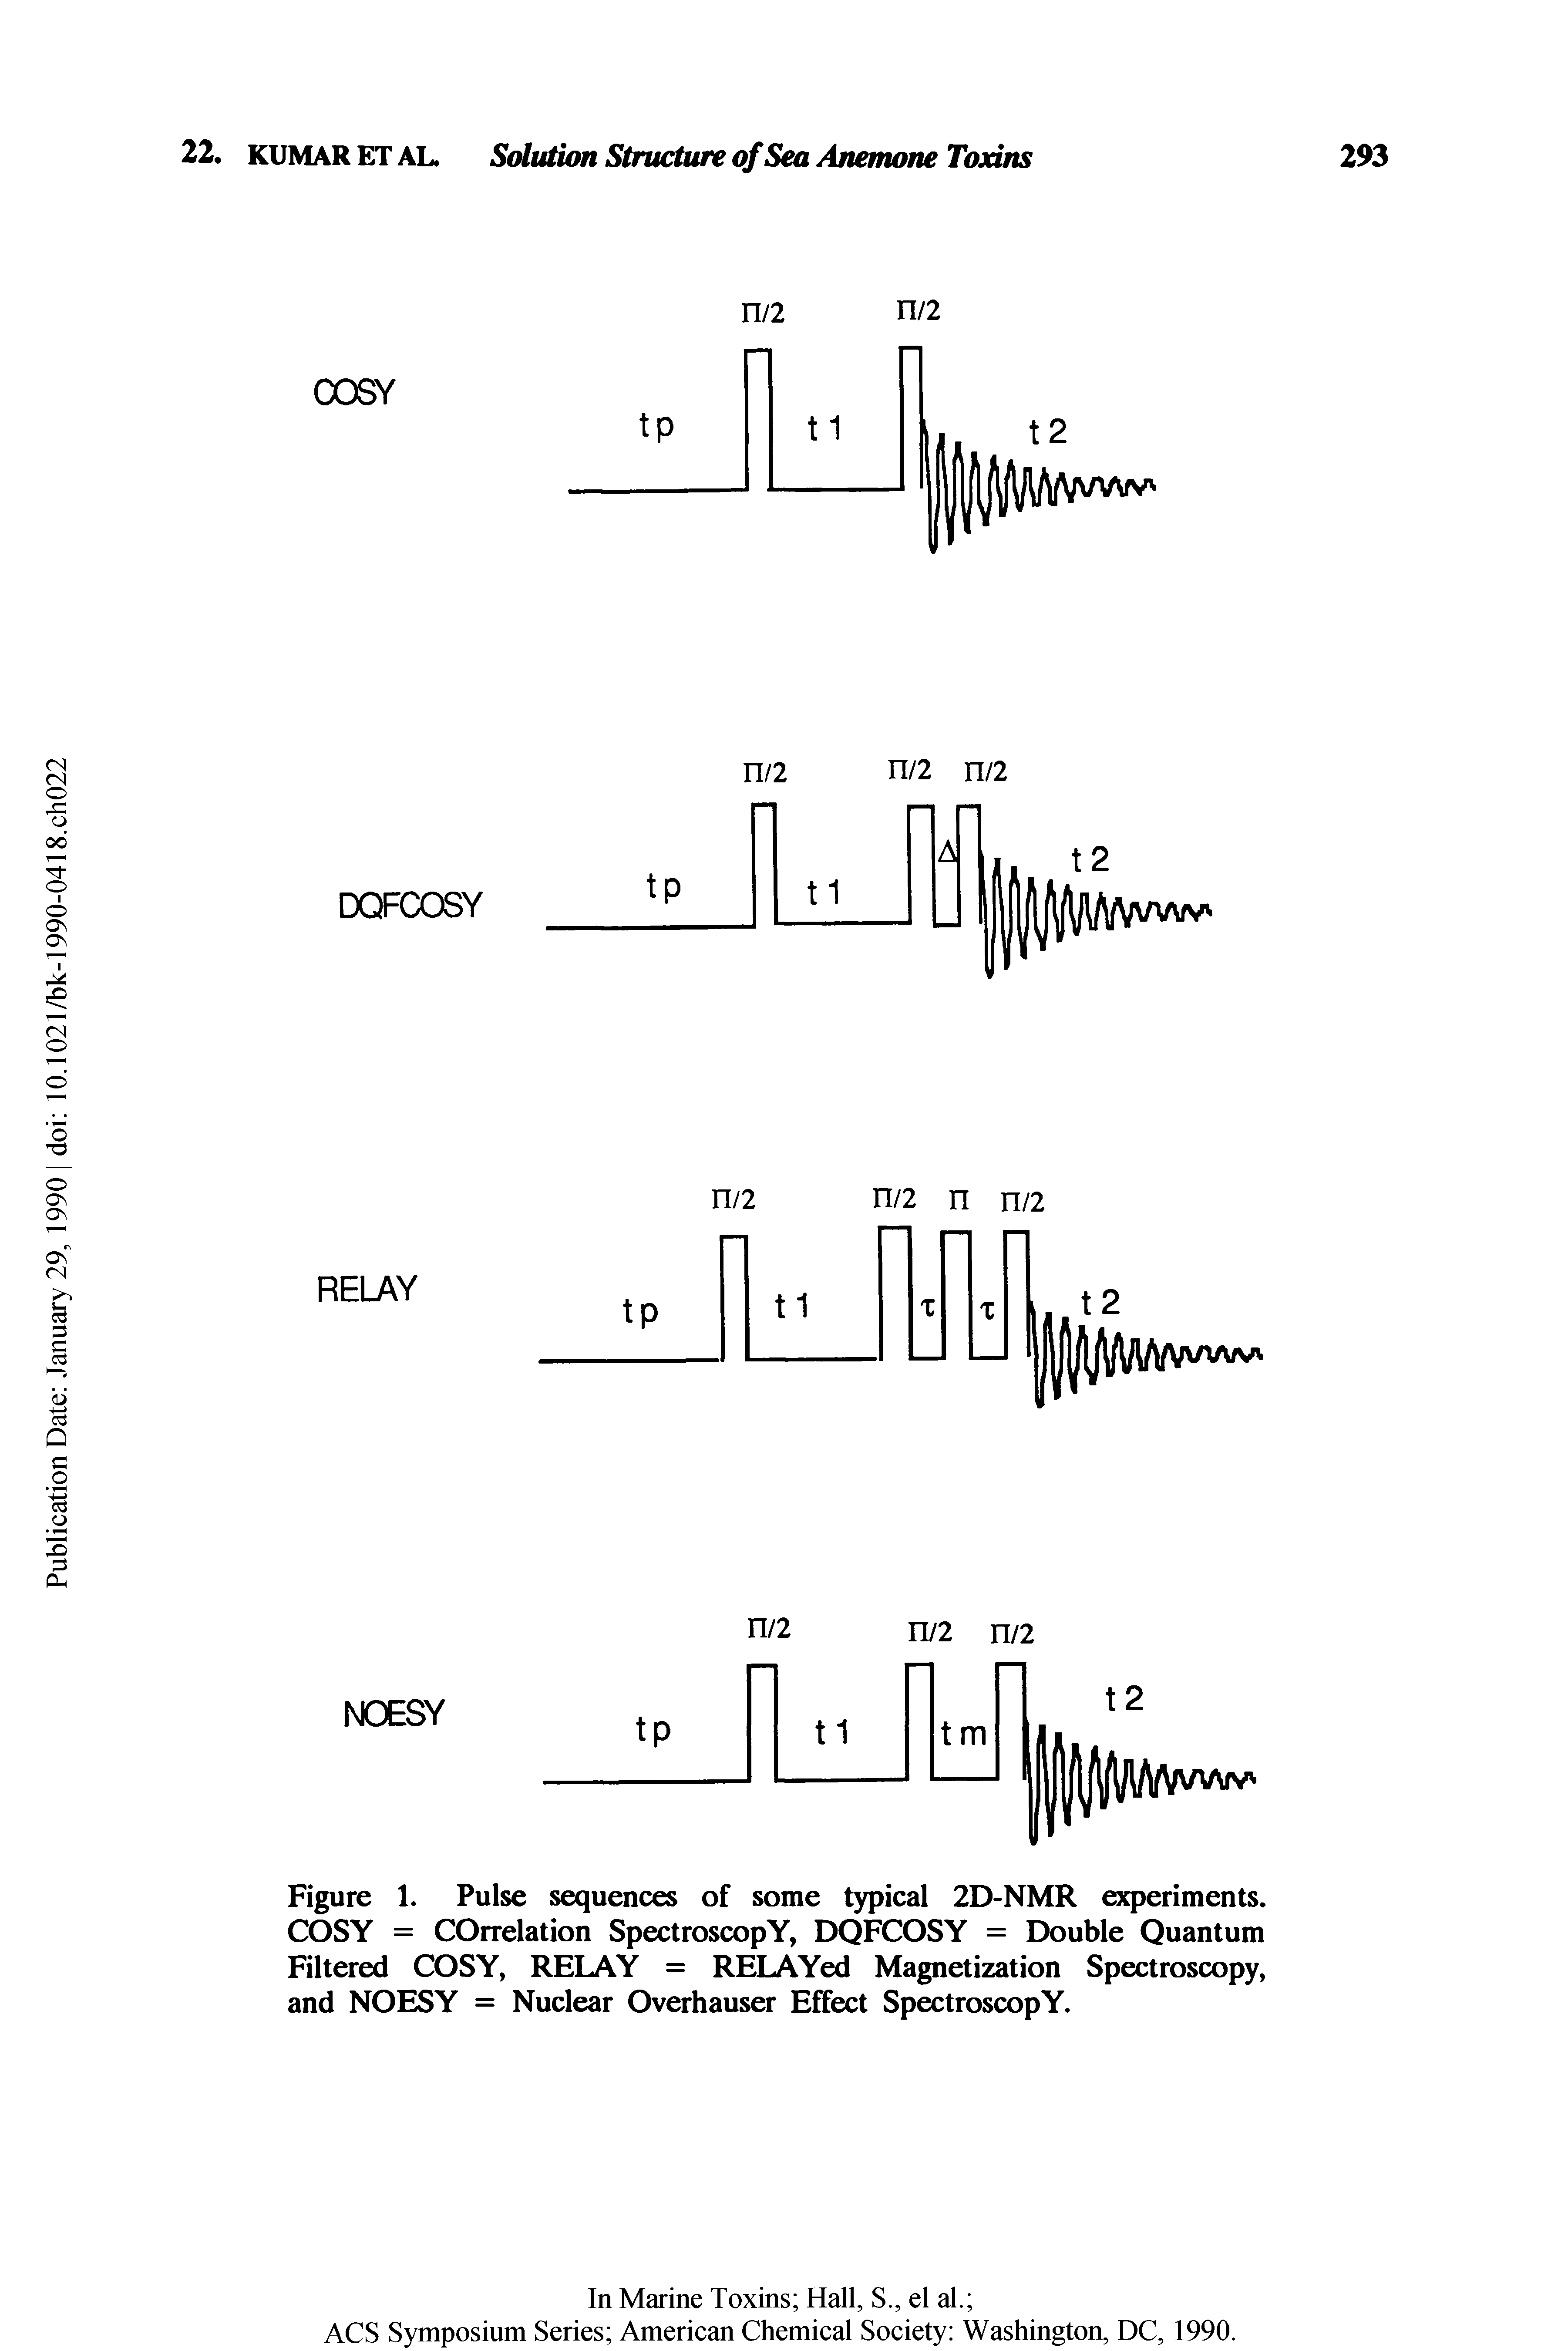 Figure 1. Pulse sequences of some typical 2D-NMR experiments. COSY = correlation SpectroscopY, DQFCOSY = Double Quantum Filtered COSY, RELAY = RELAYed Magnetization Spectroscopy, and NOESY = Nuclear Overhauser Effect SpectroscopY.